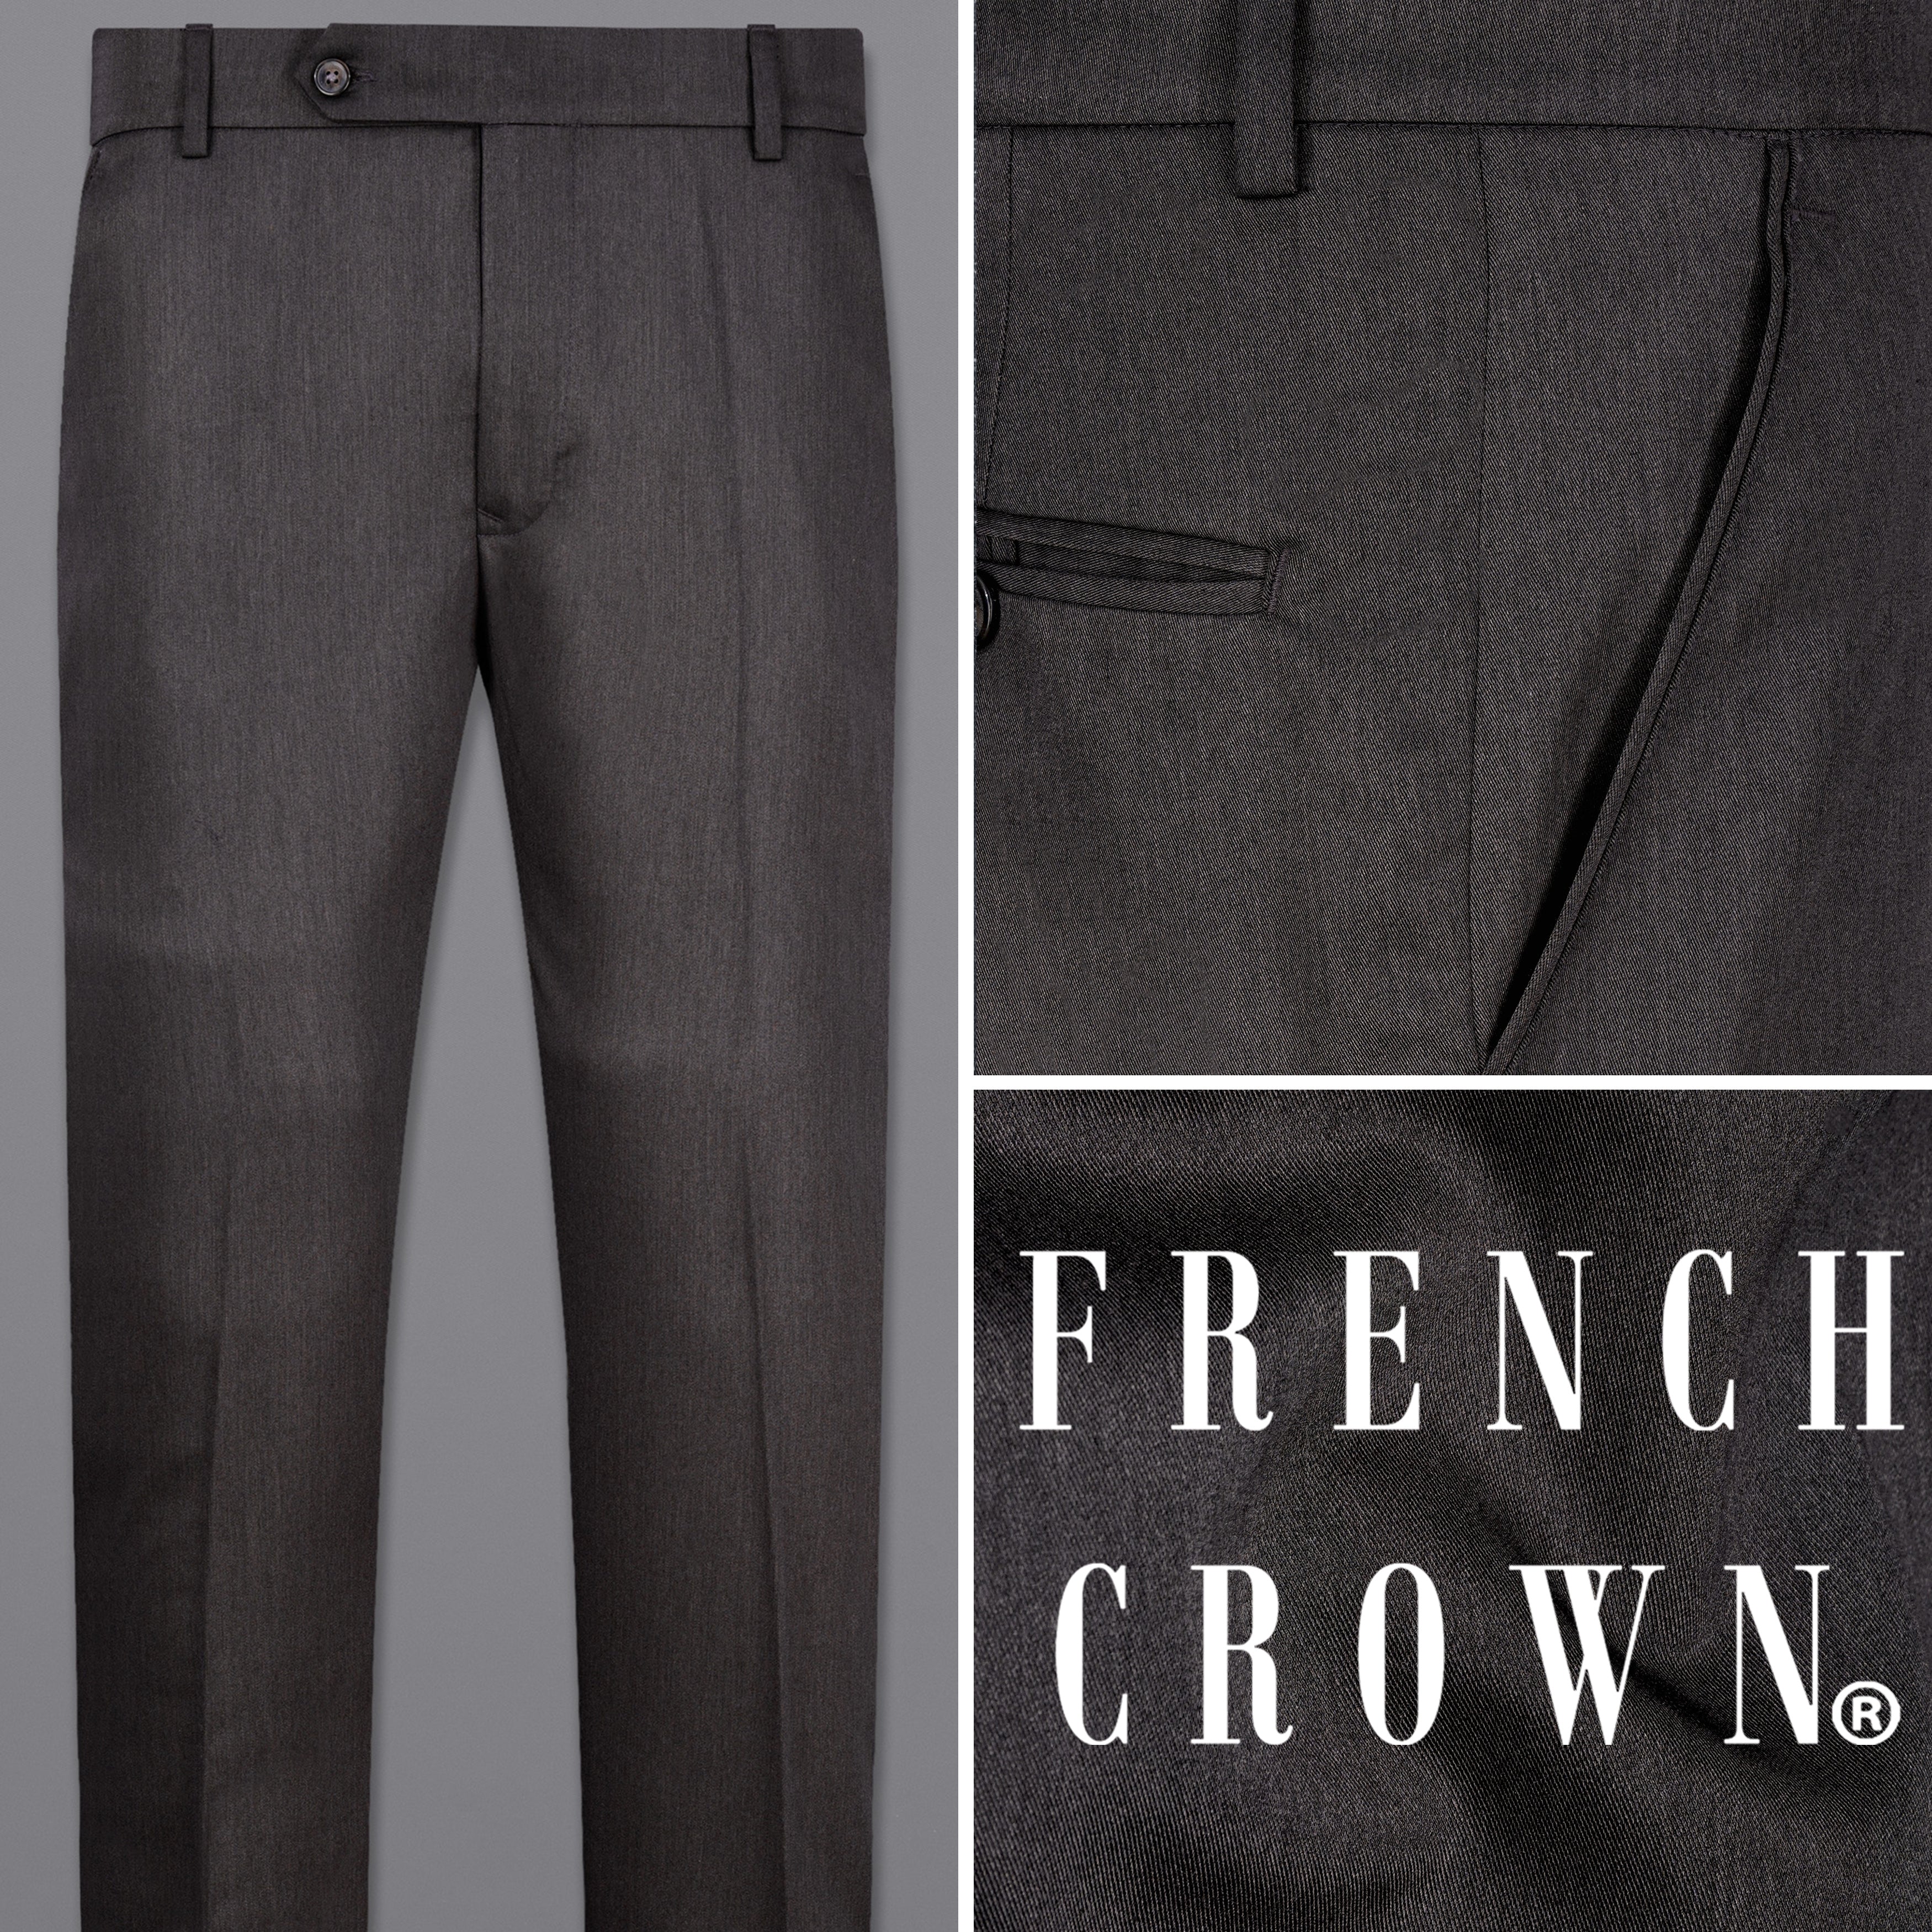 french crown Regular Fit Men Black Trousers - Buy french crown Regular Fit  Men Black Trousers Online at Best Prices in India | Flipkart.com